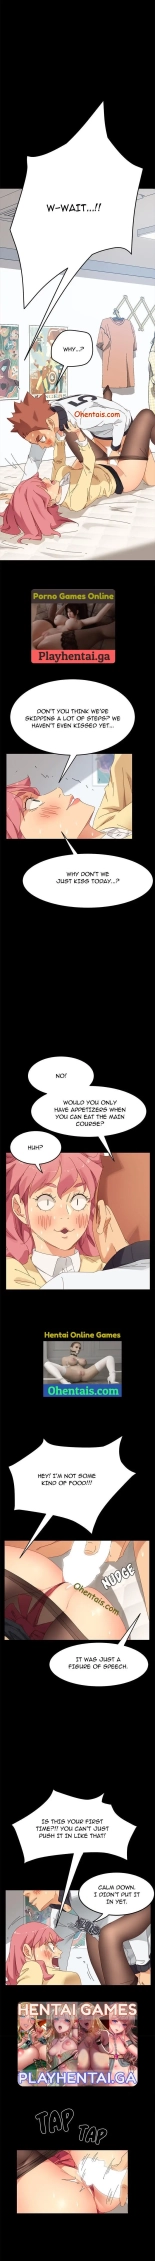 The Perfect Roommates Ch. 9 : page 7